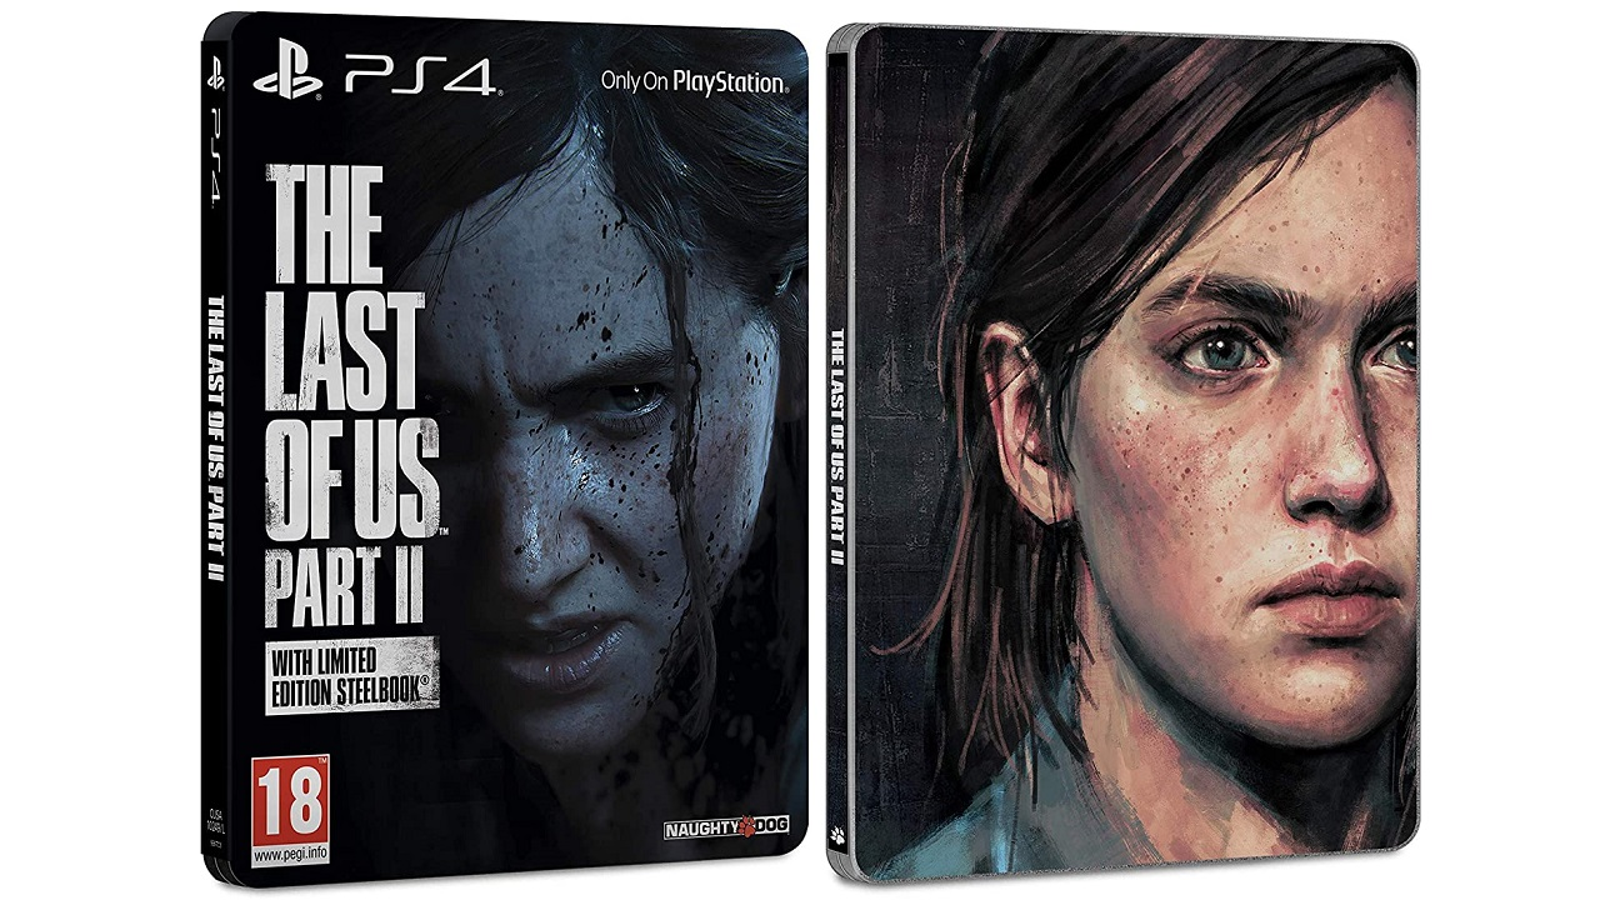 Only two of us. Одни из нас 2 диск. Одни из нас (the last of us) ps4.